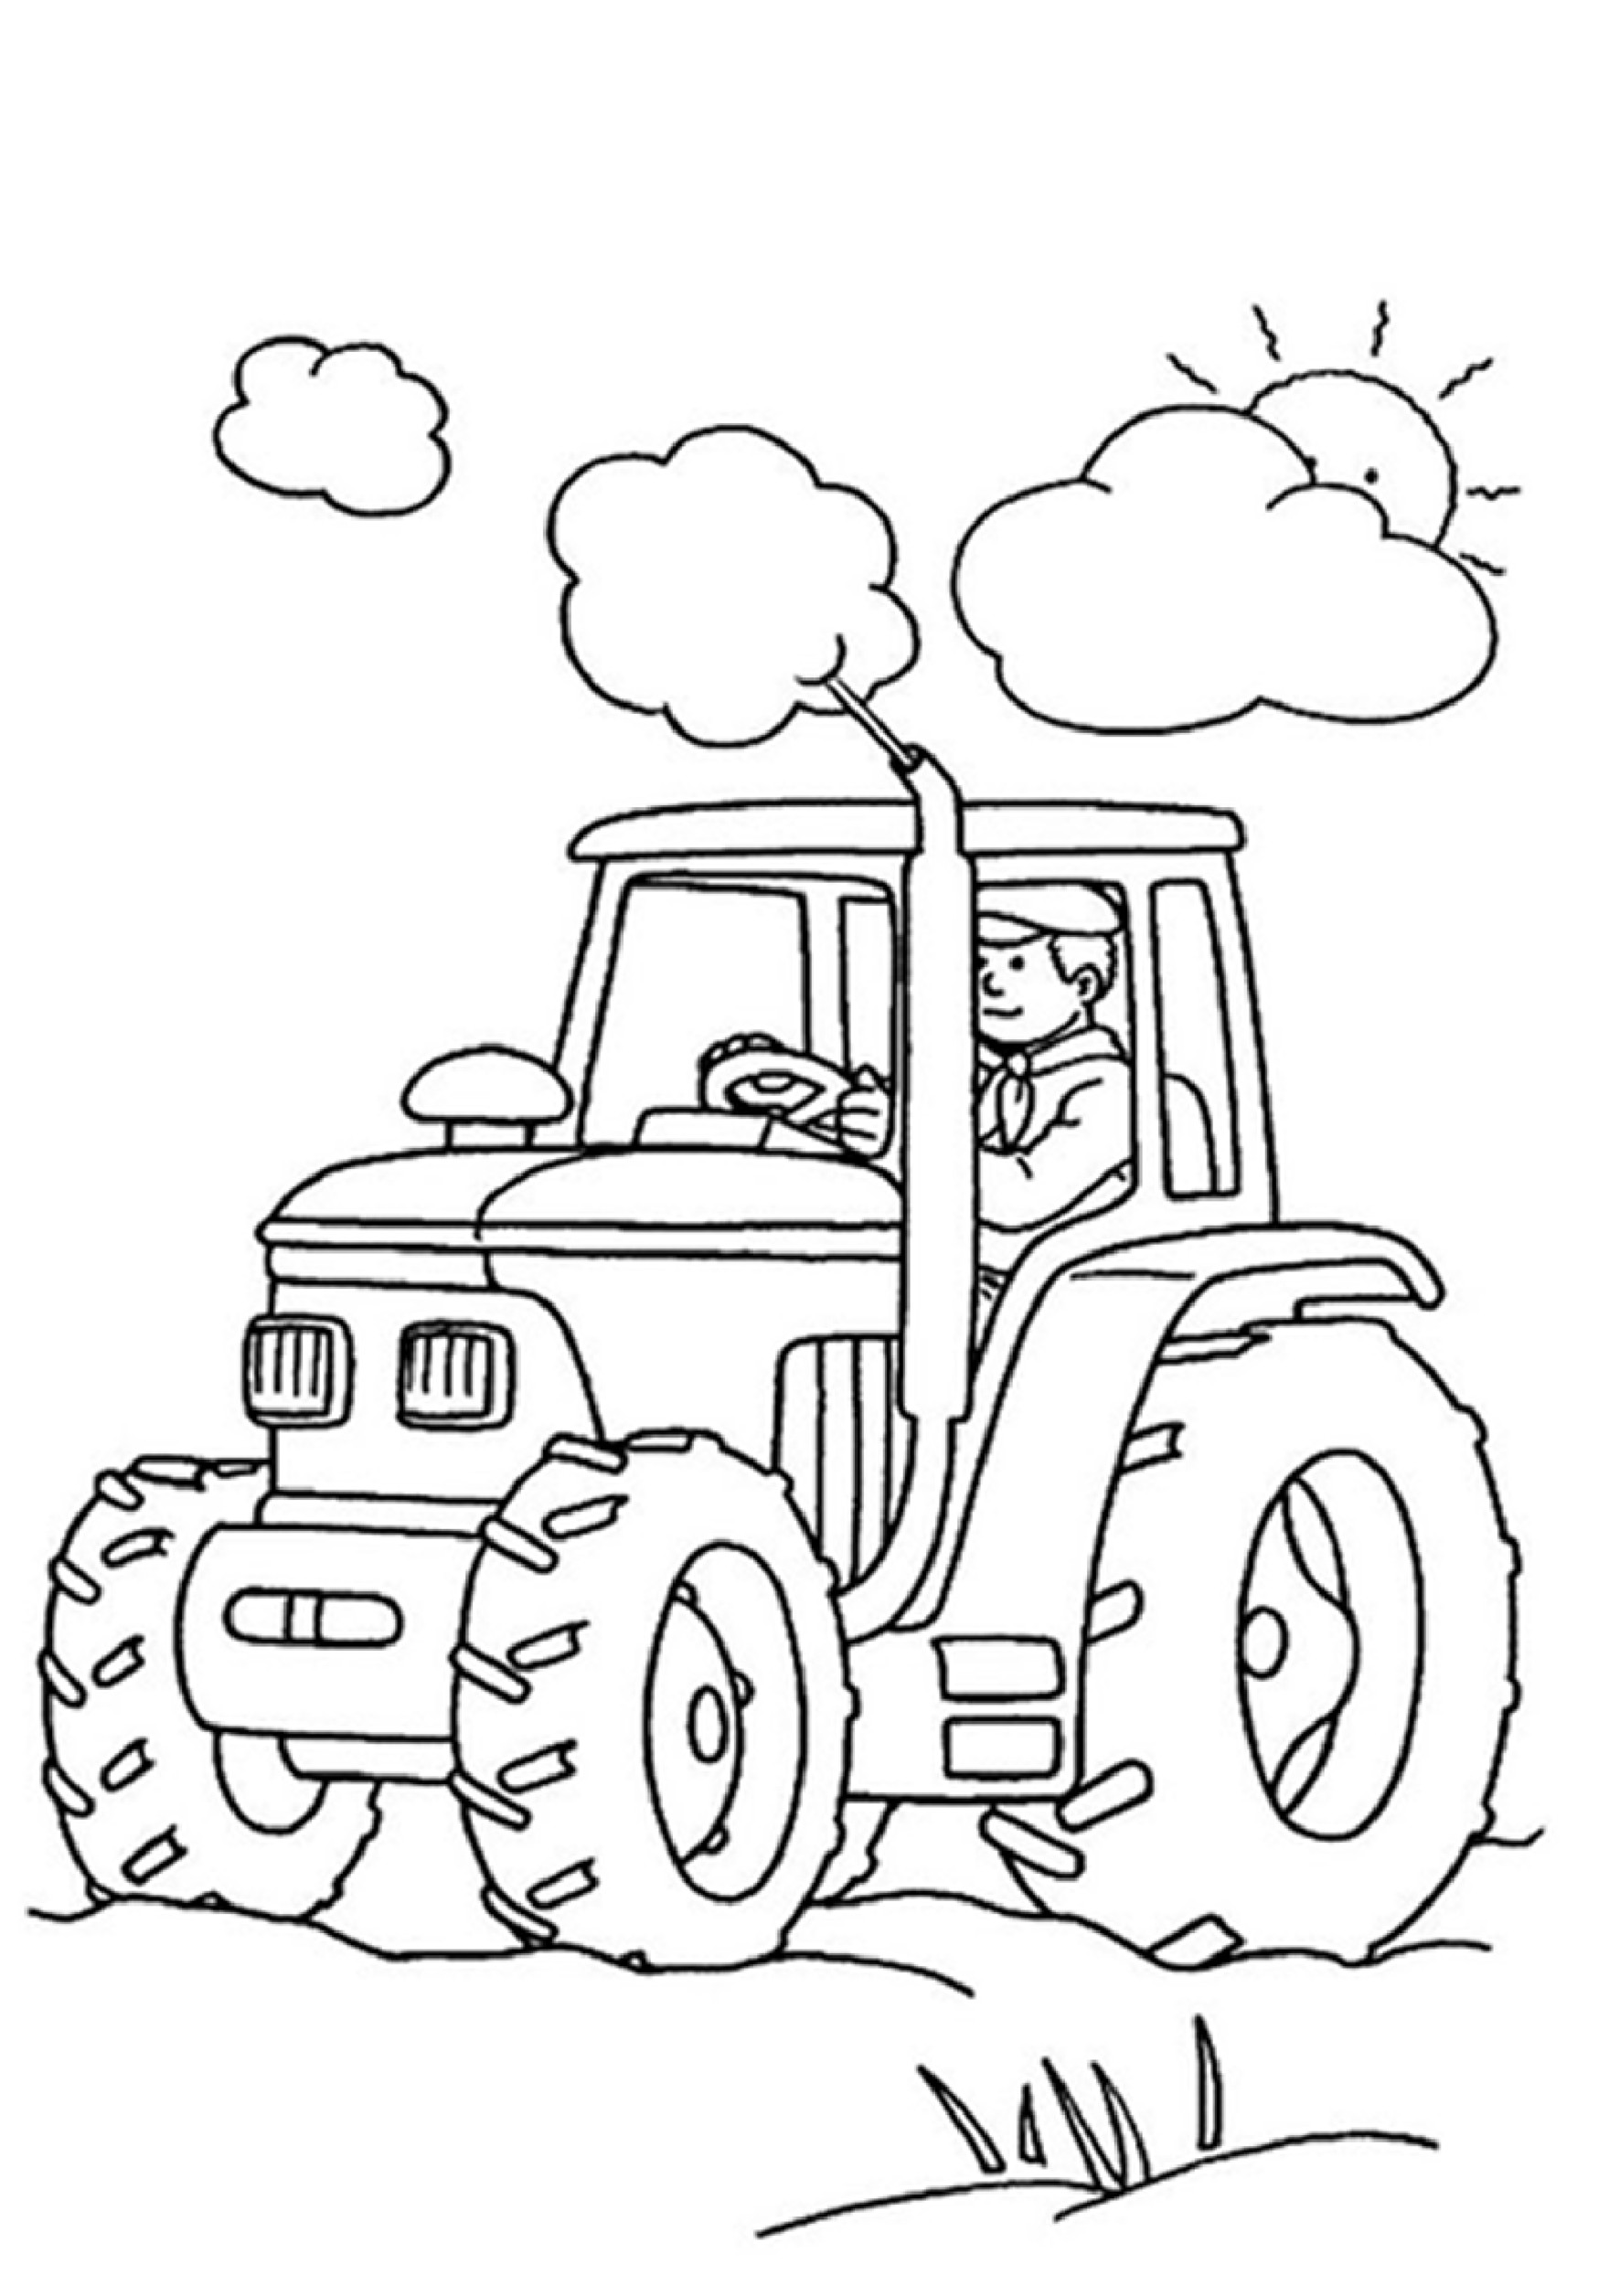 Printable Coloring Pages Boys
 Boy Coloring Pages Pdf Coloring Home